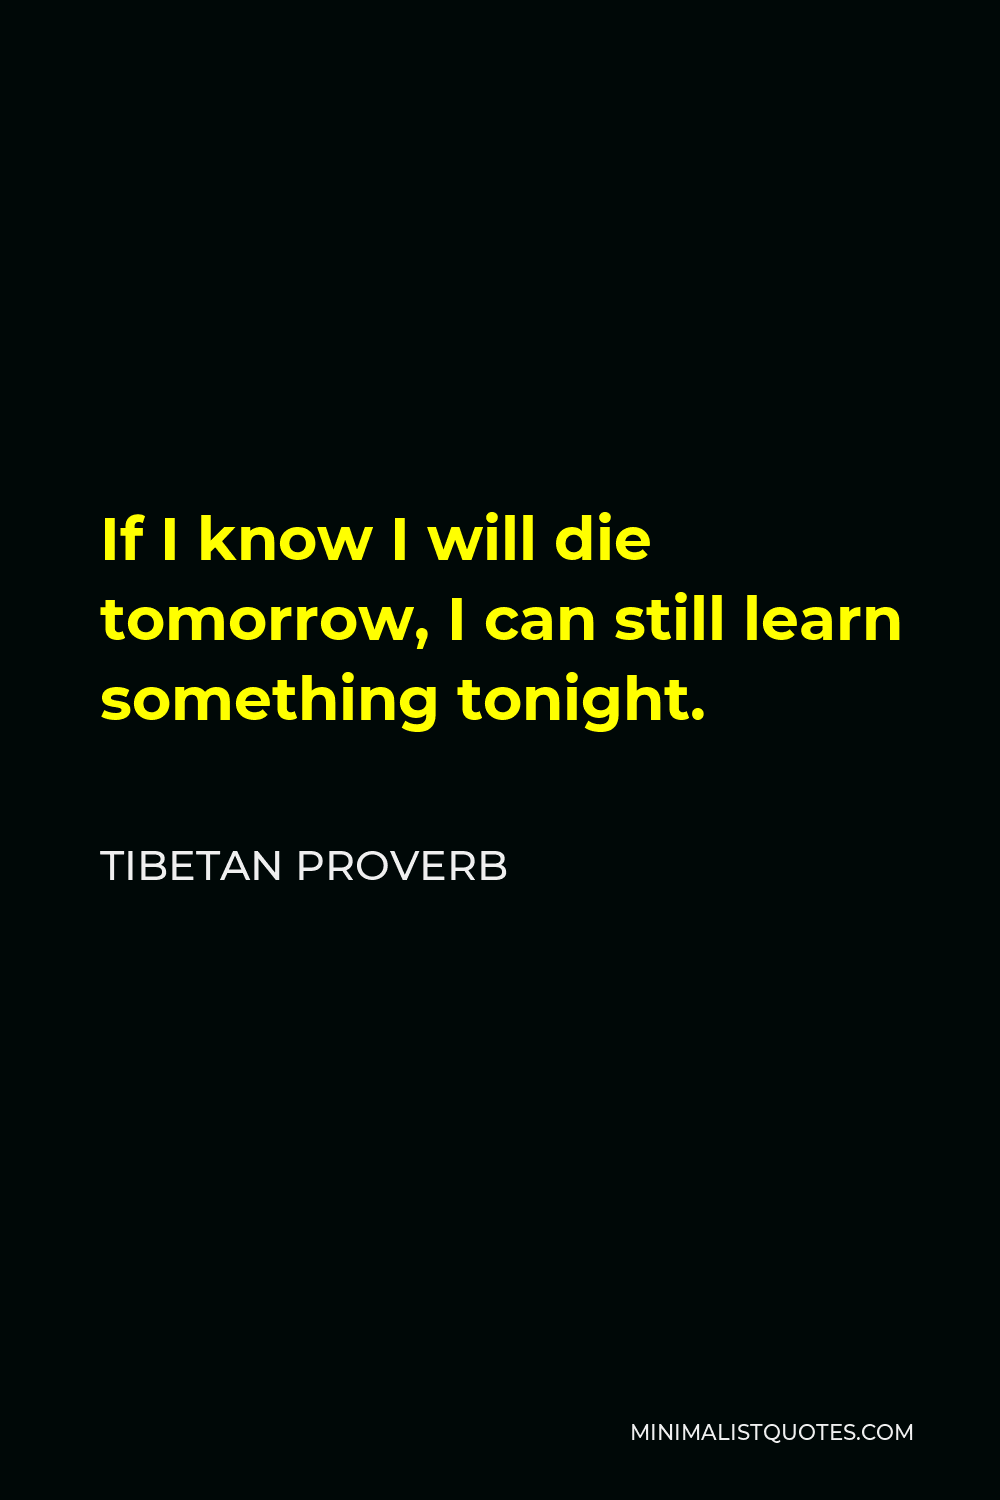 Tibetan Proverb Quote - If I know I will die tomorrow, I can still learn something tonight.